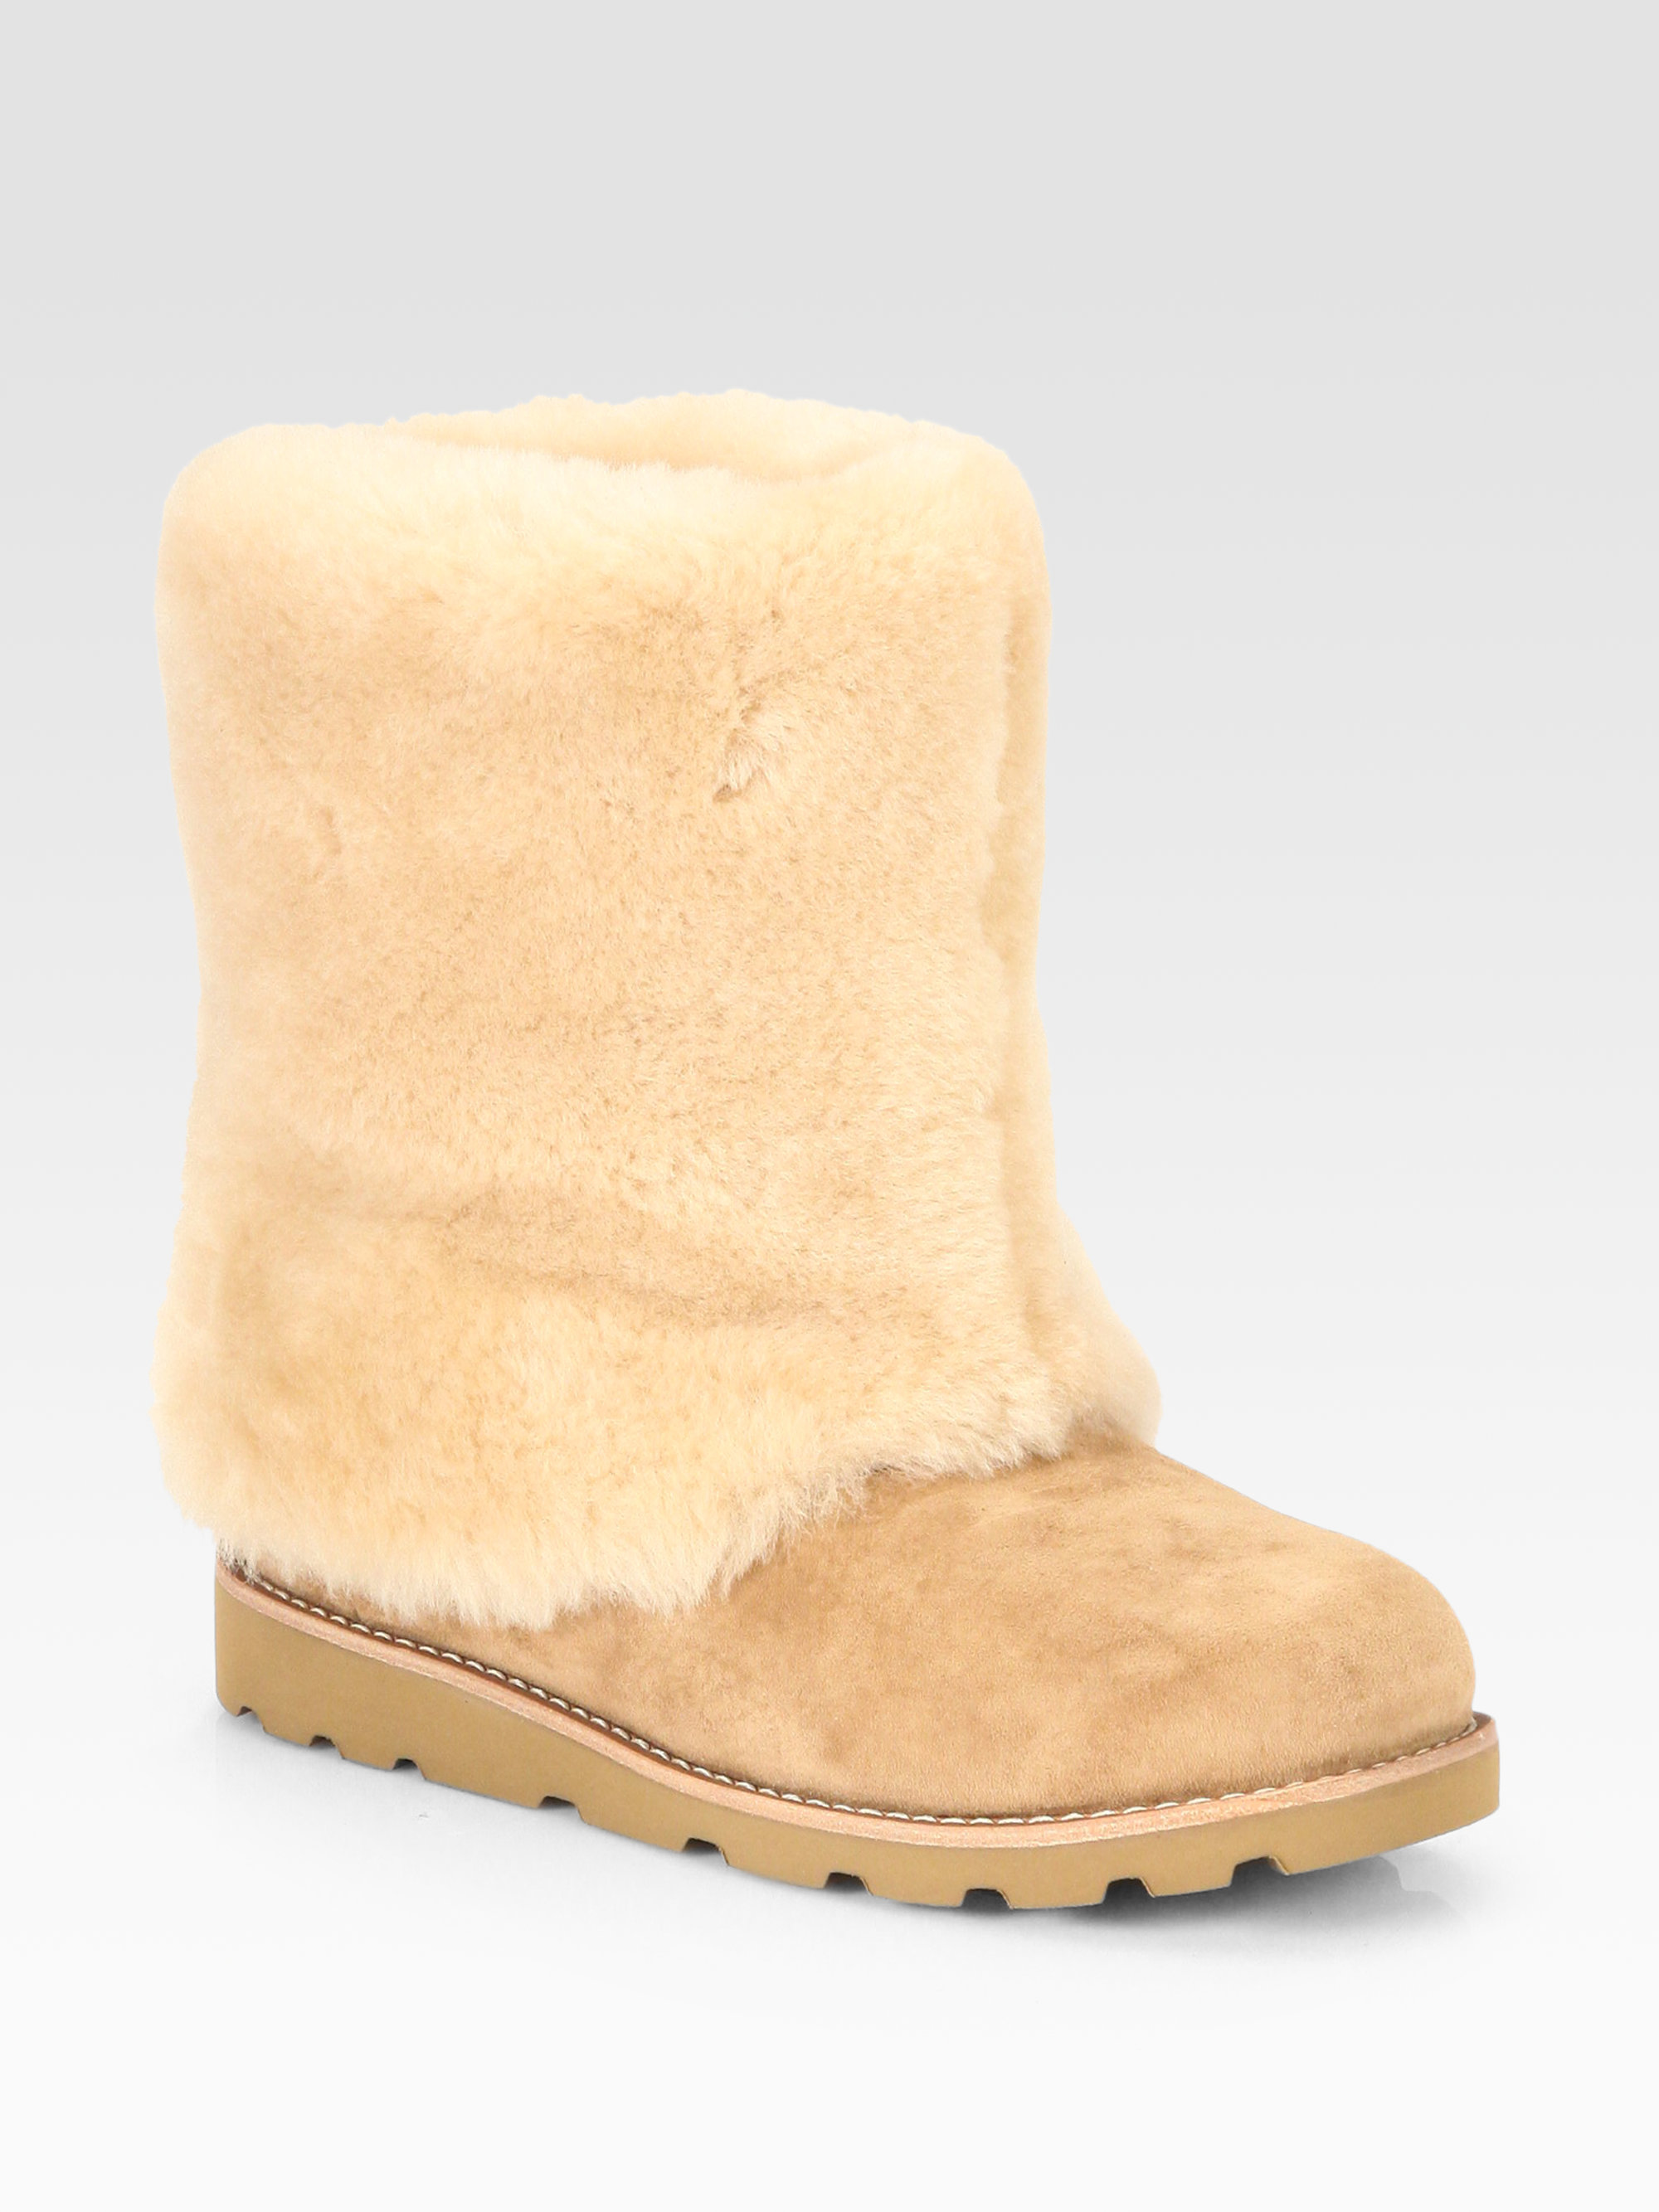 Ugg Maylin Suede Shearling Cuff Ankle Boots | Lyst